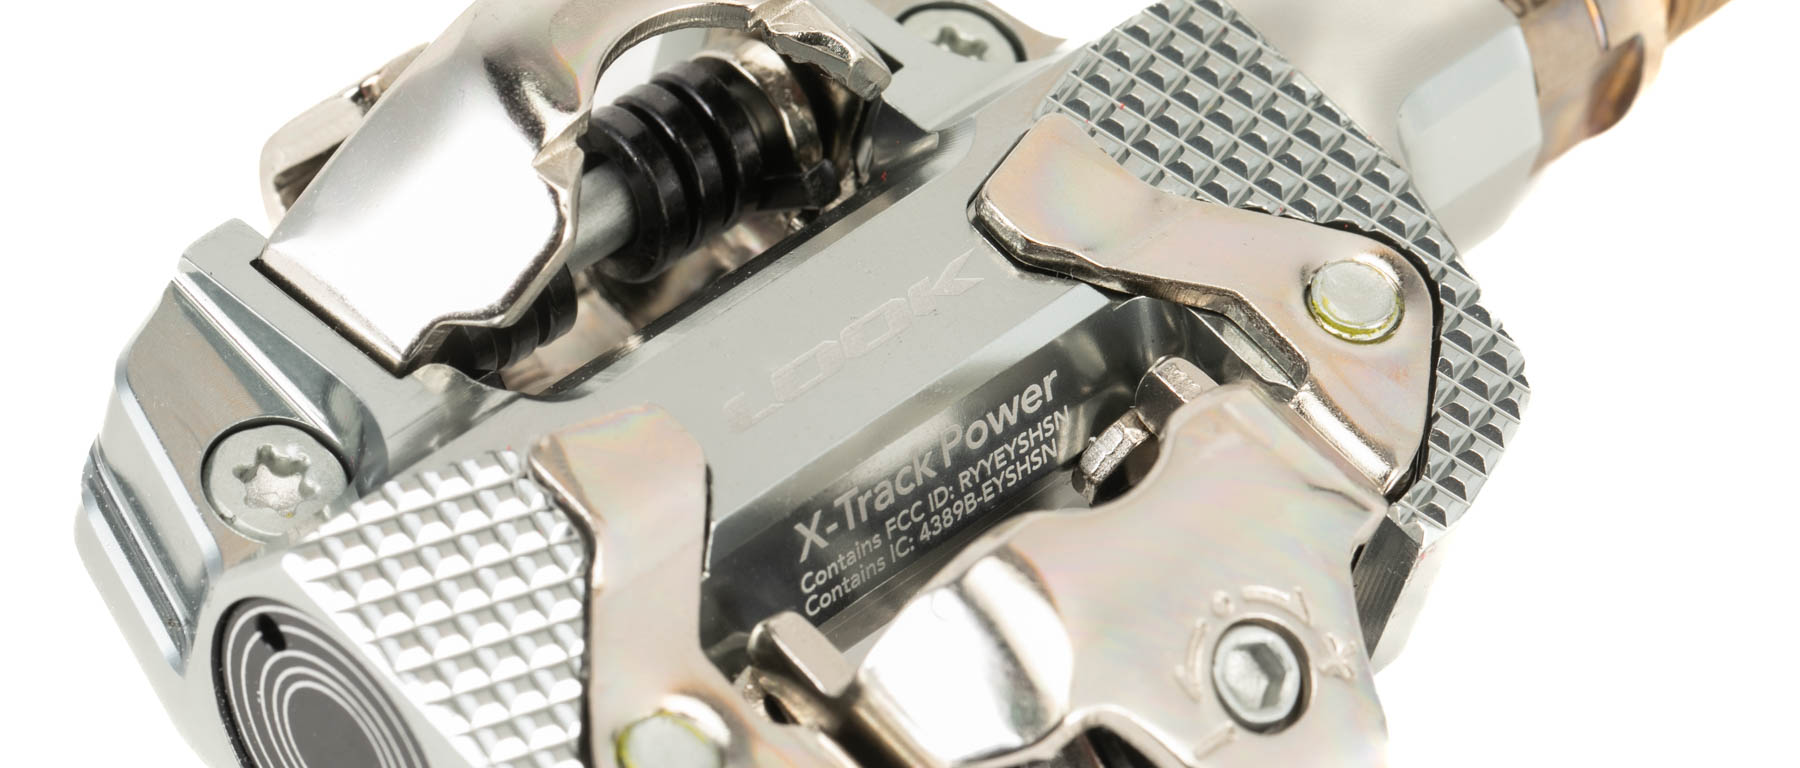 LOOK X-Track Power Meter Pedals